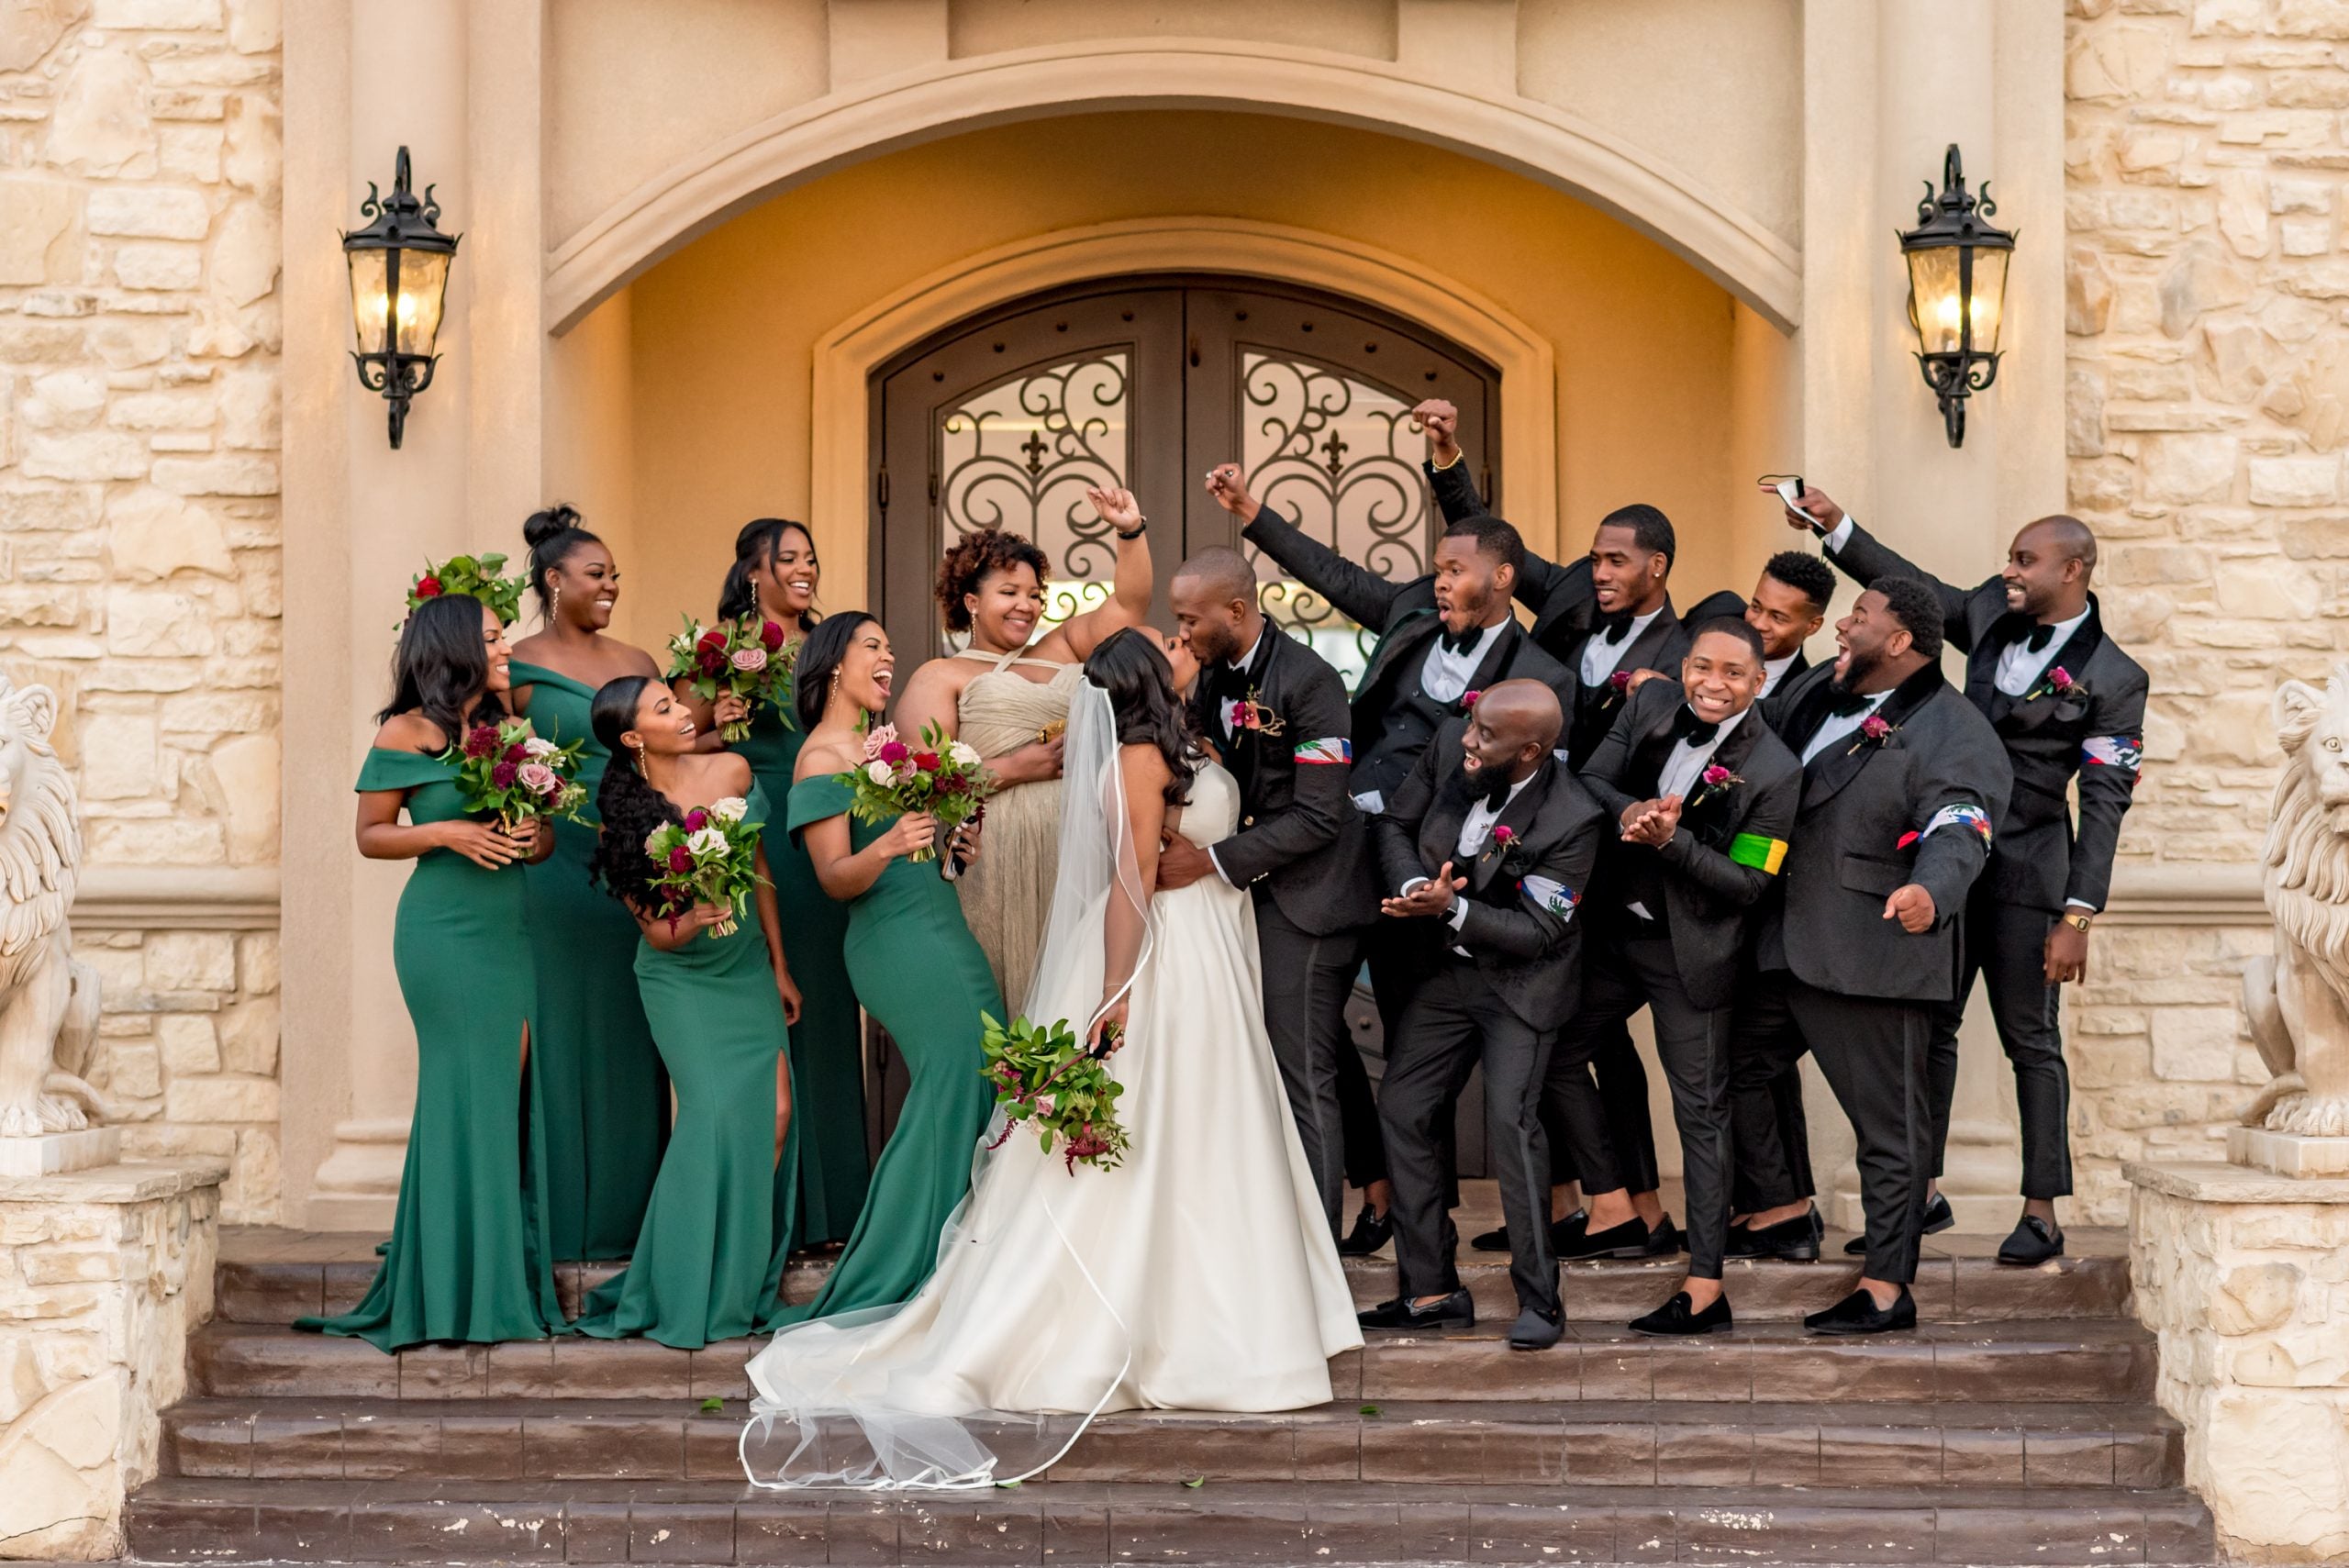 Bridal Bliss: Love Was Overflowing At Karl and Sydnie's Texas Wedding ...